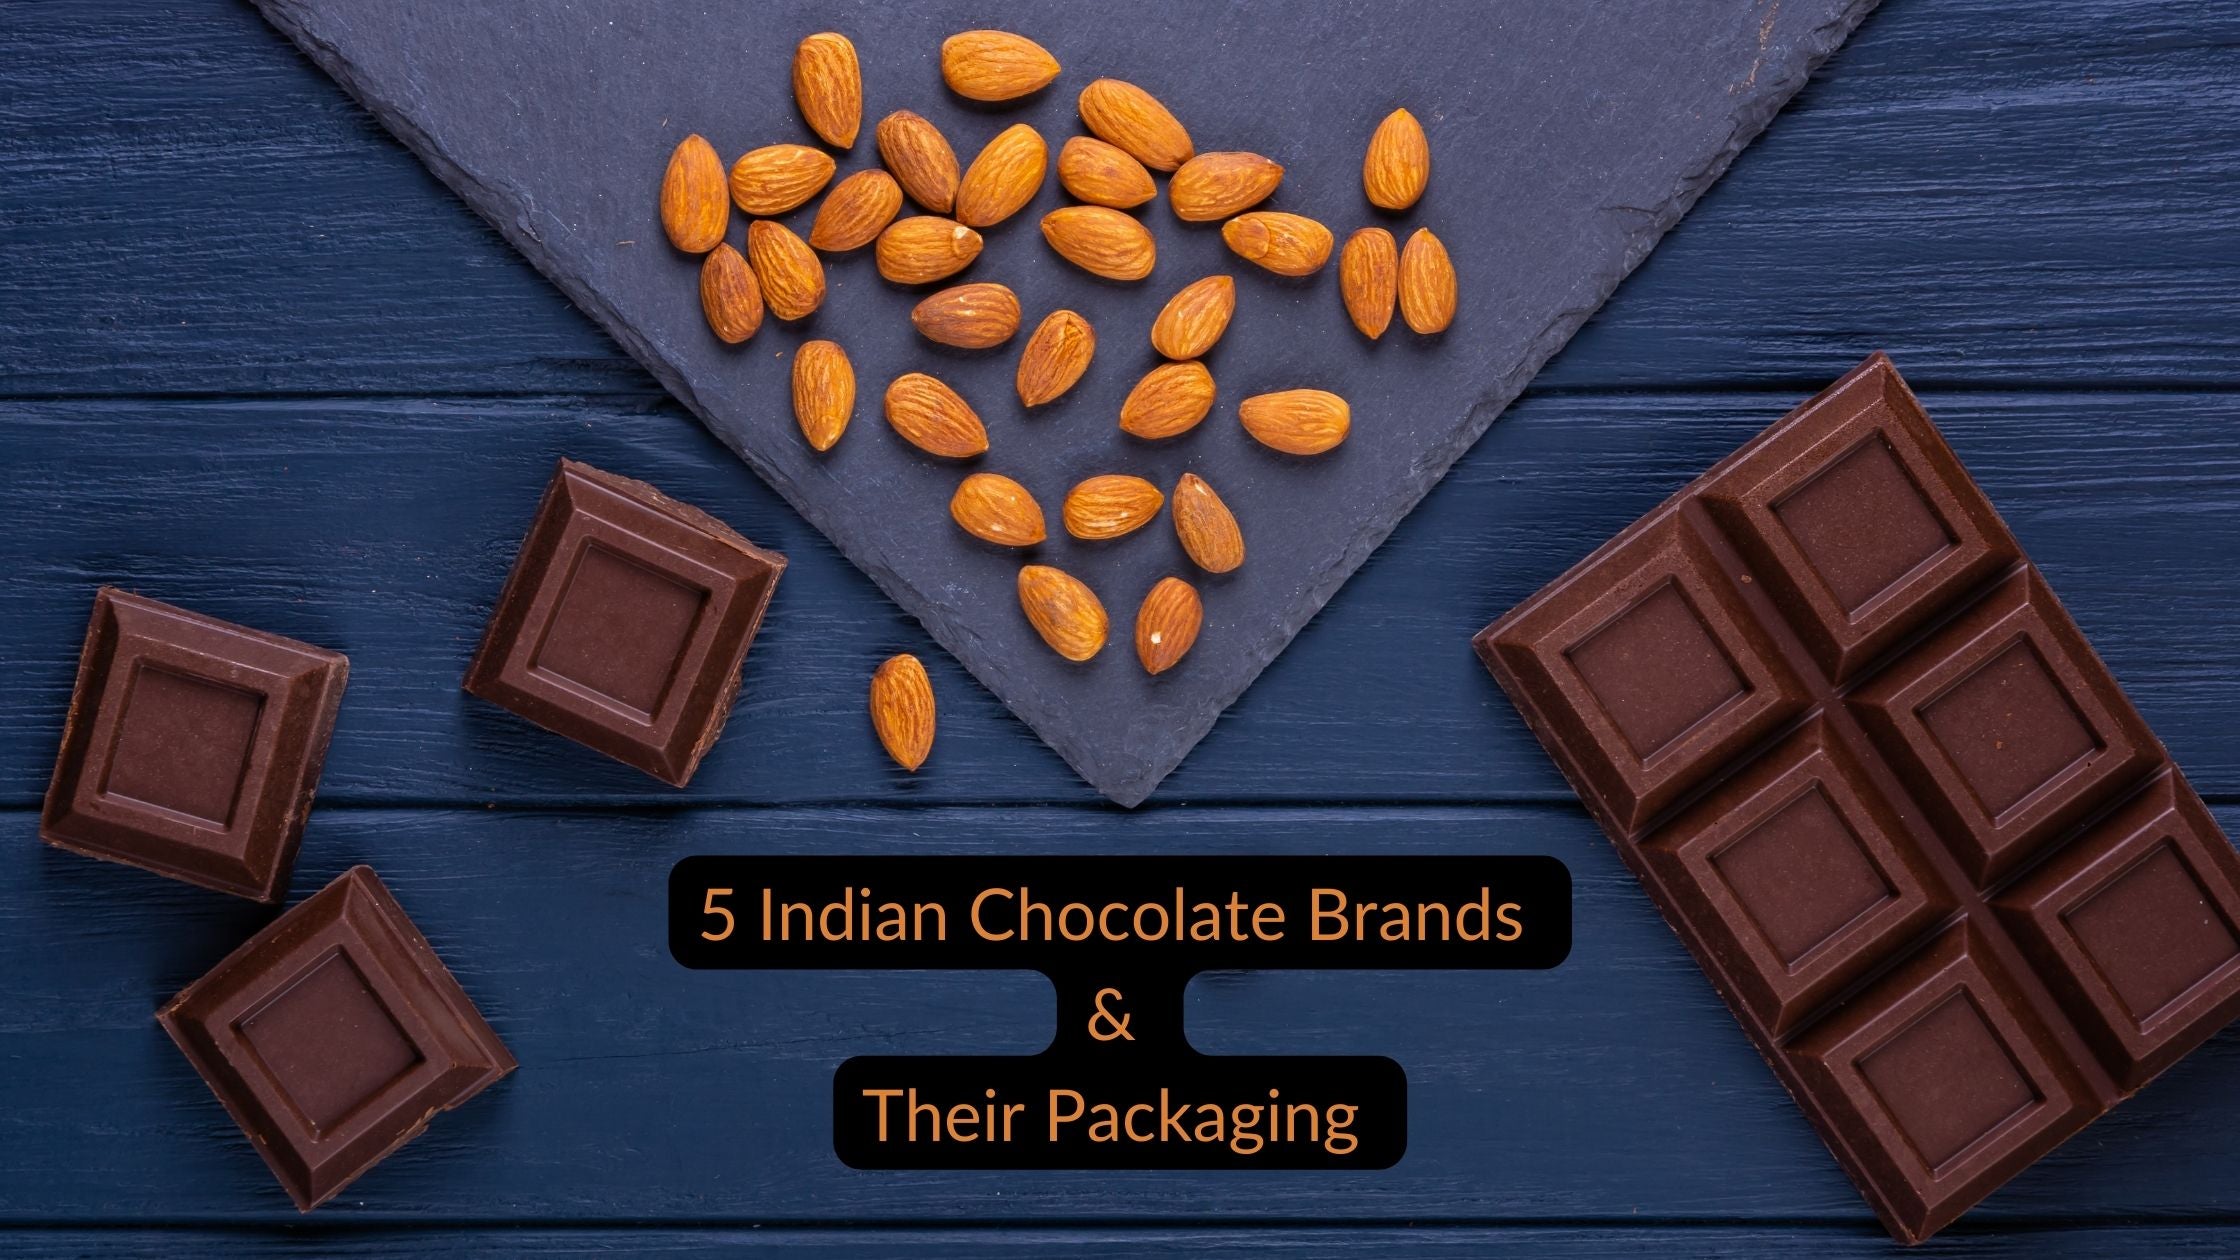 5 Indian Chocolate Brands & Their Packaging